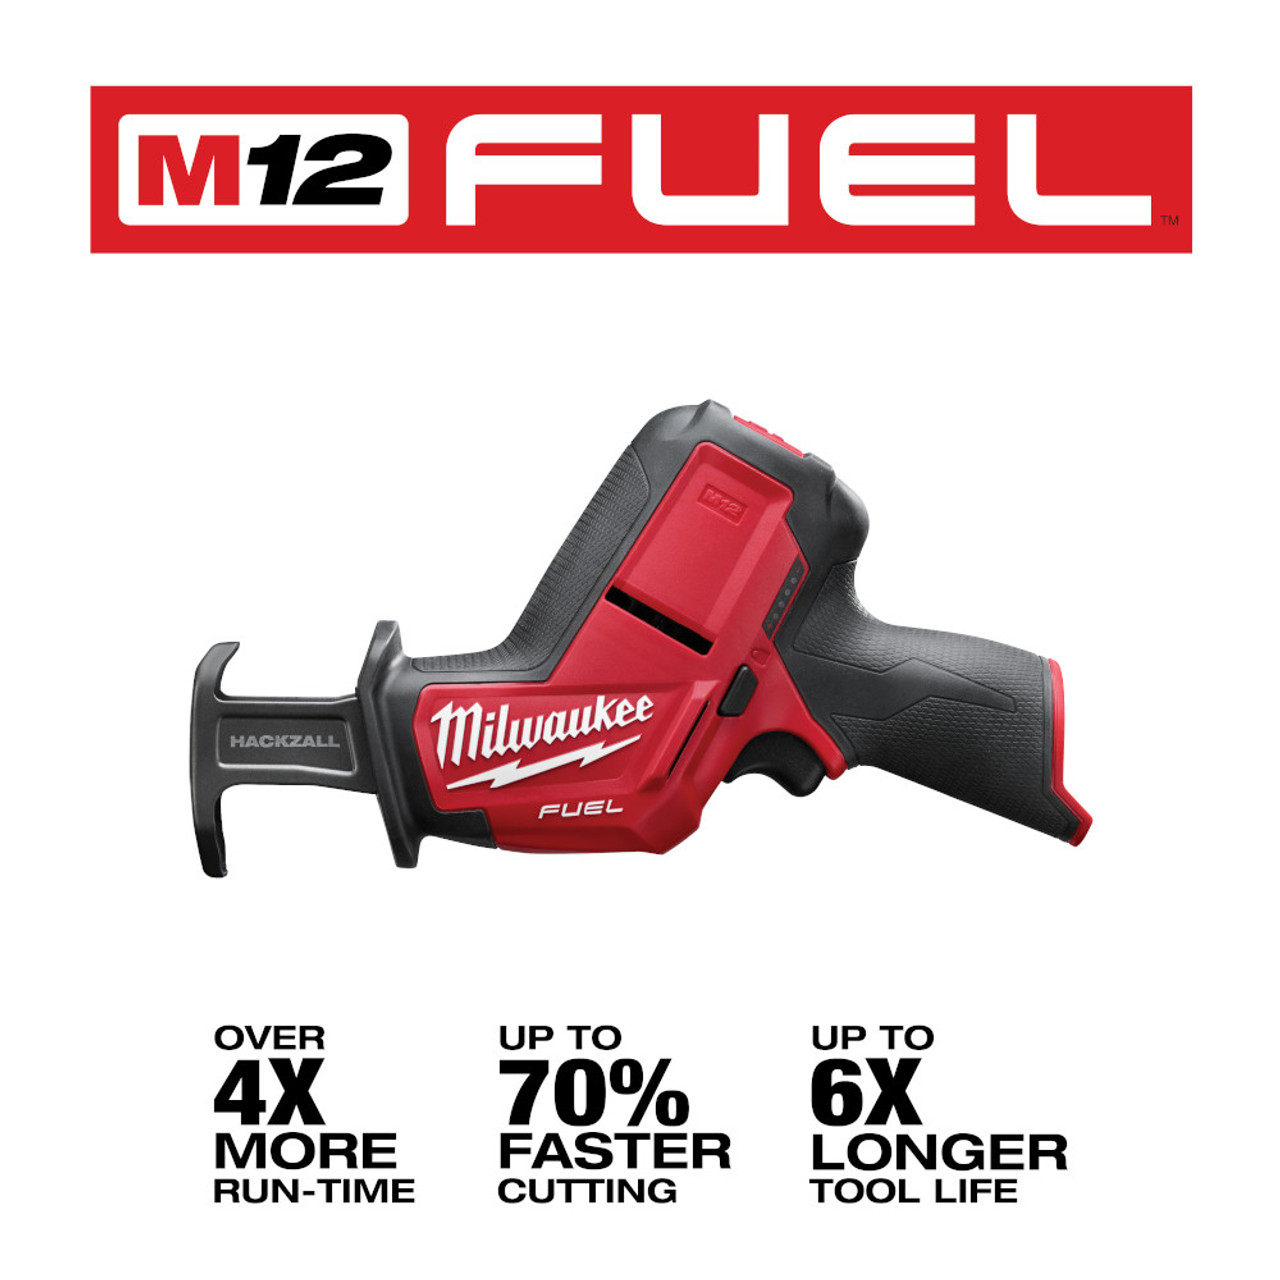 M12 FUEL 12 Volt Lithium-Ion Brushless Cordless HACKZALL Reciprocating Saw  Tool Only